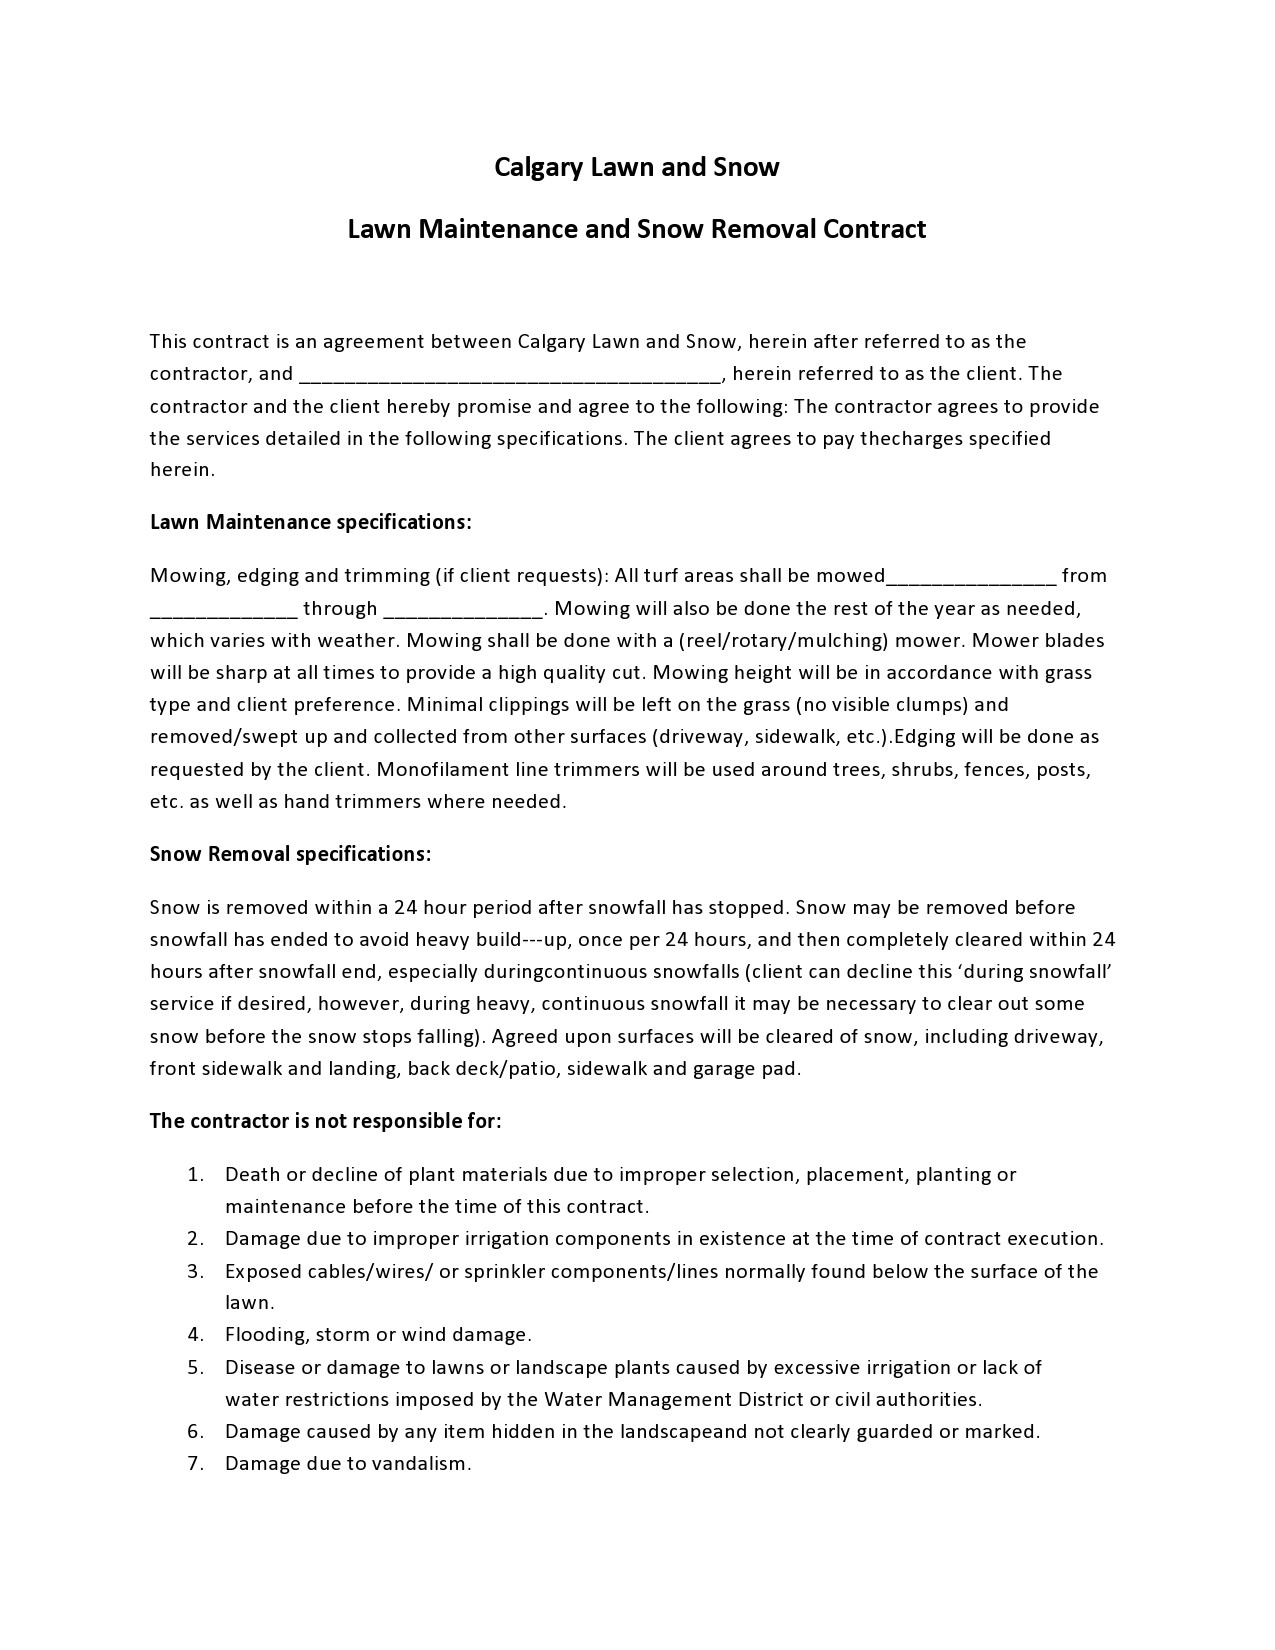 Free lawn care contract template 02